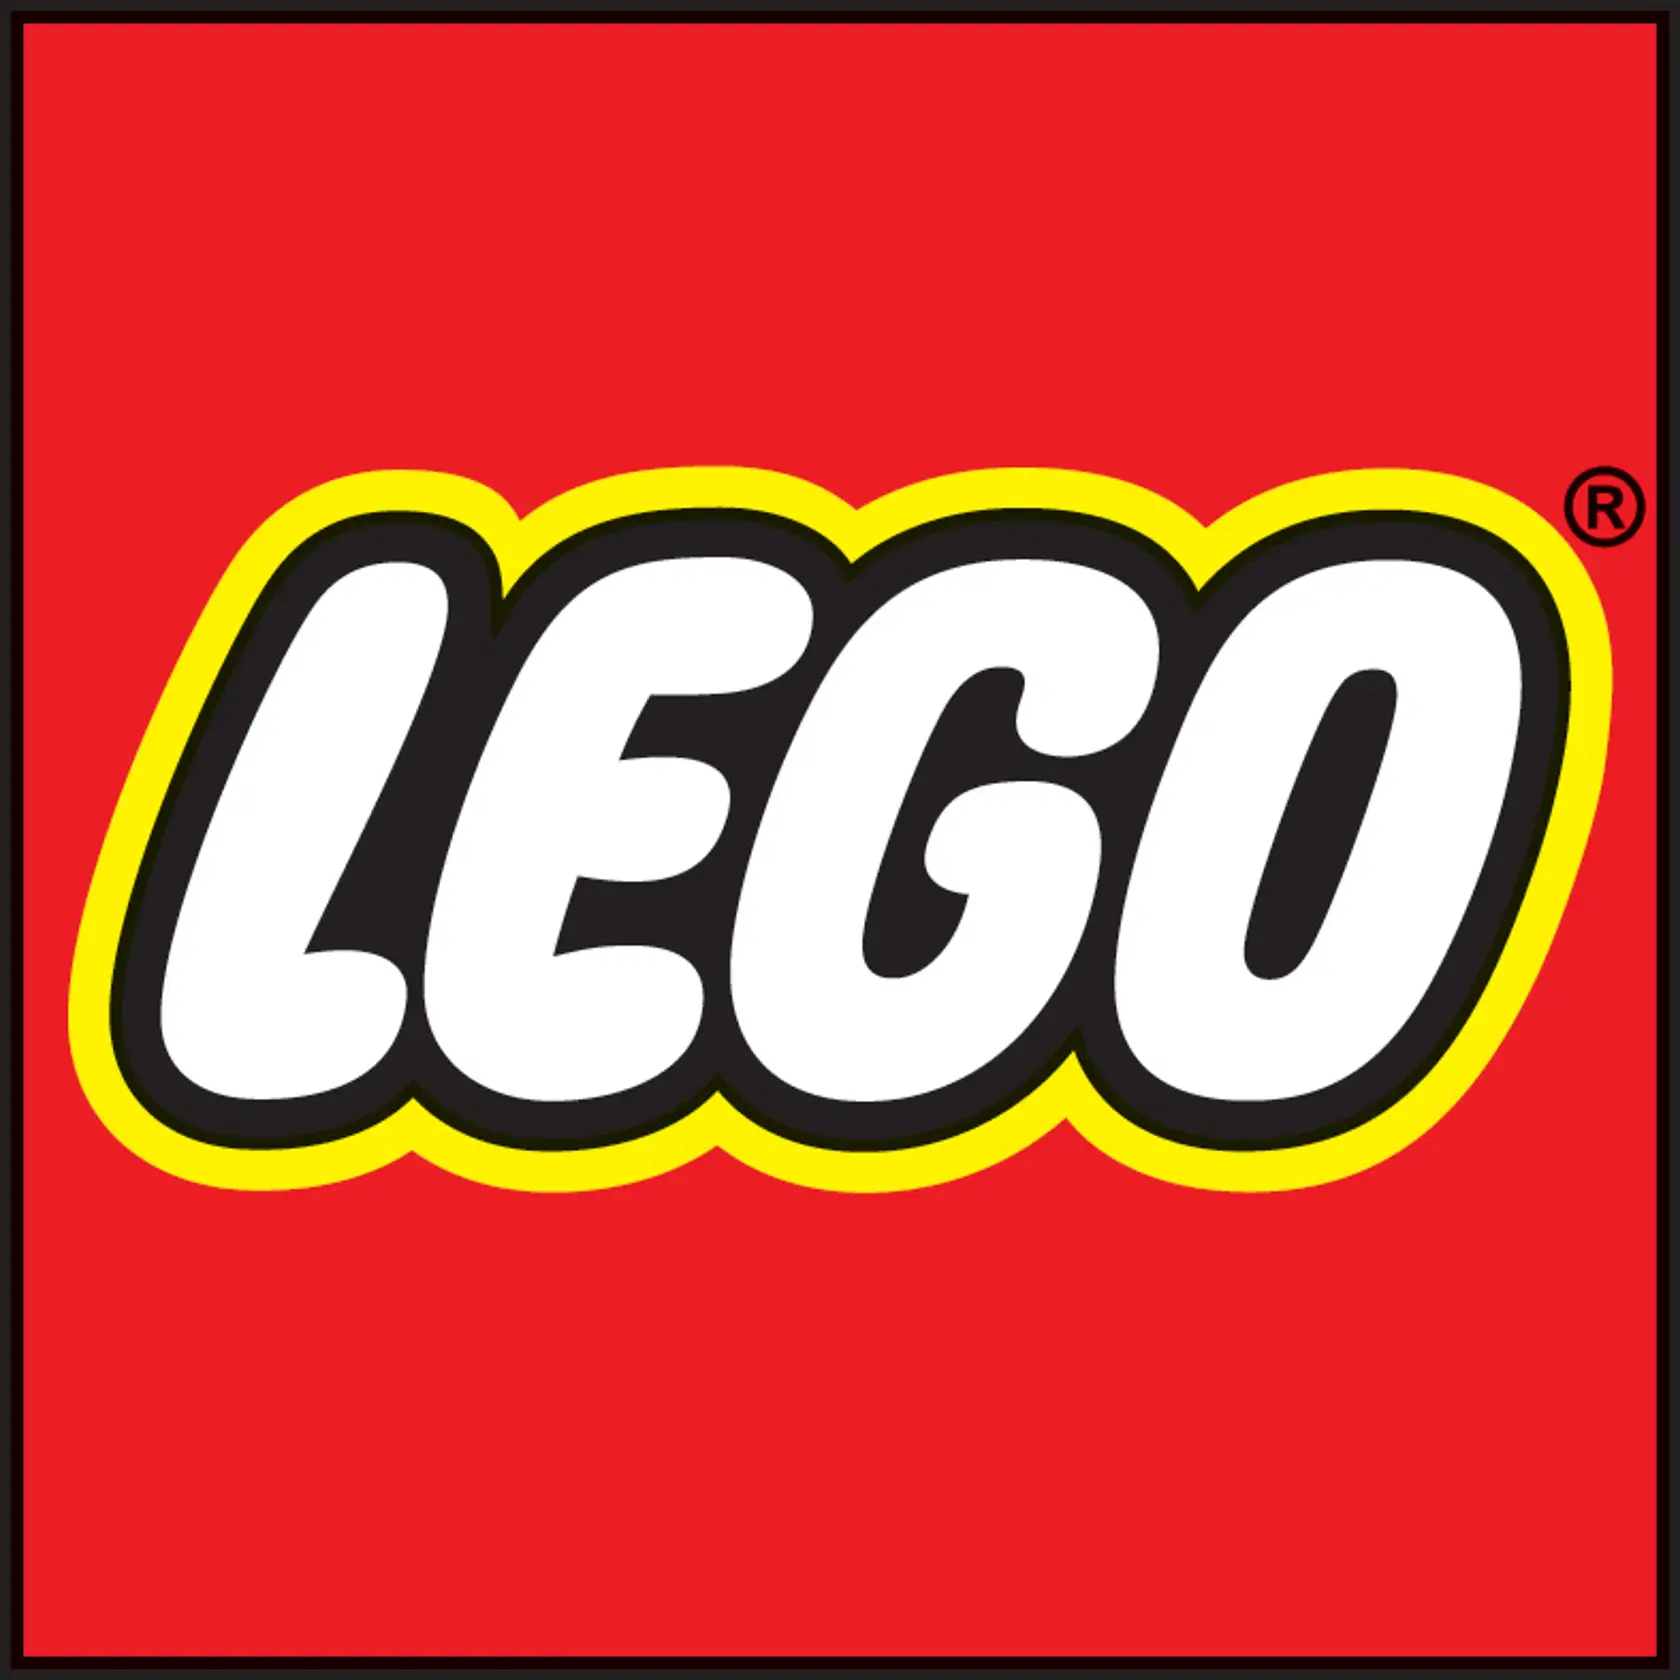 The current LEGO Logo